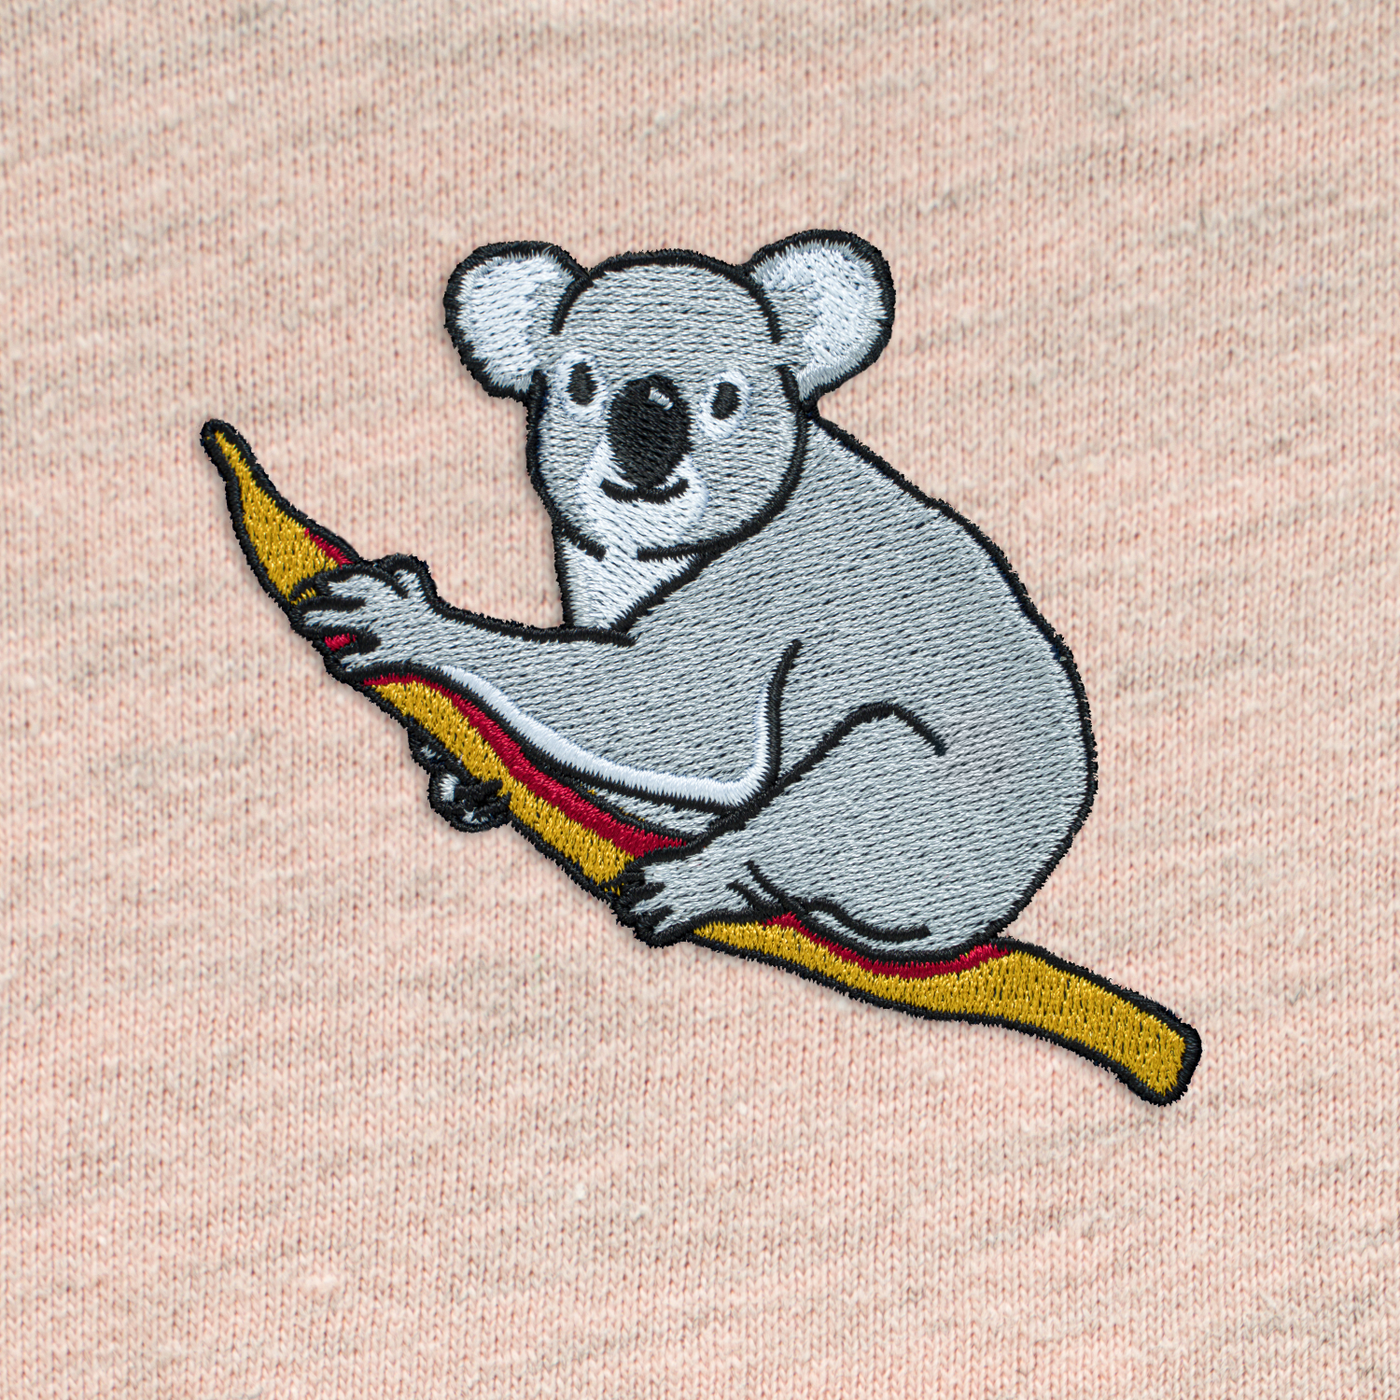 Bobby's Planet Women's Embroidered Koala T-Shirt from Australia Down Under Animals Collection in Heather Prism Peach Color#color_heather-prism-peach